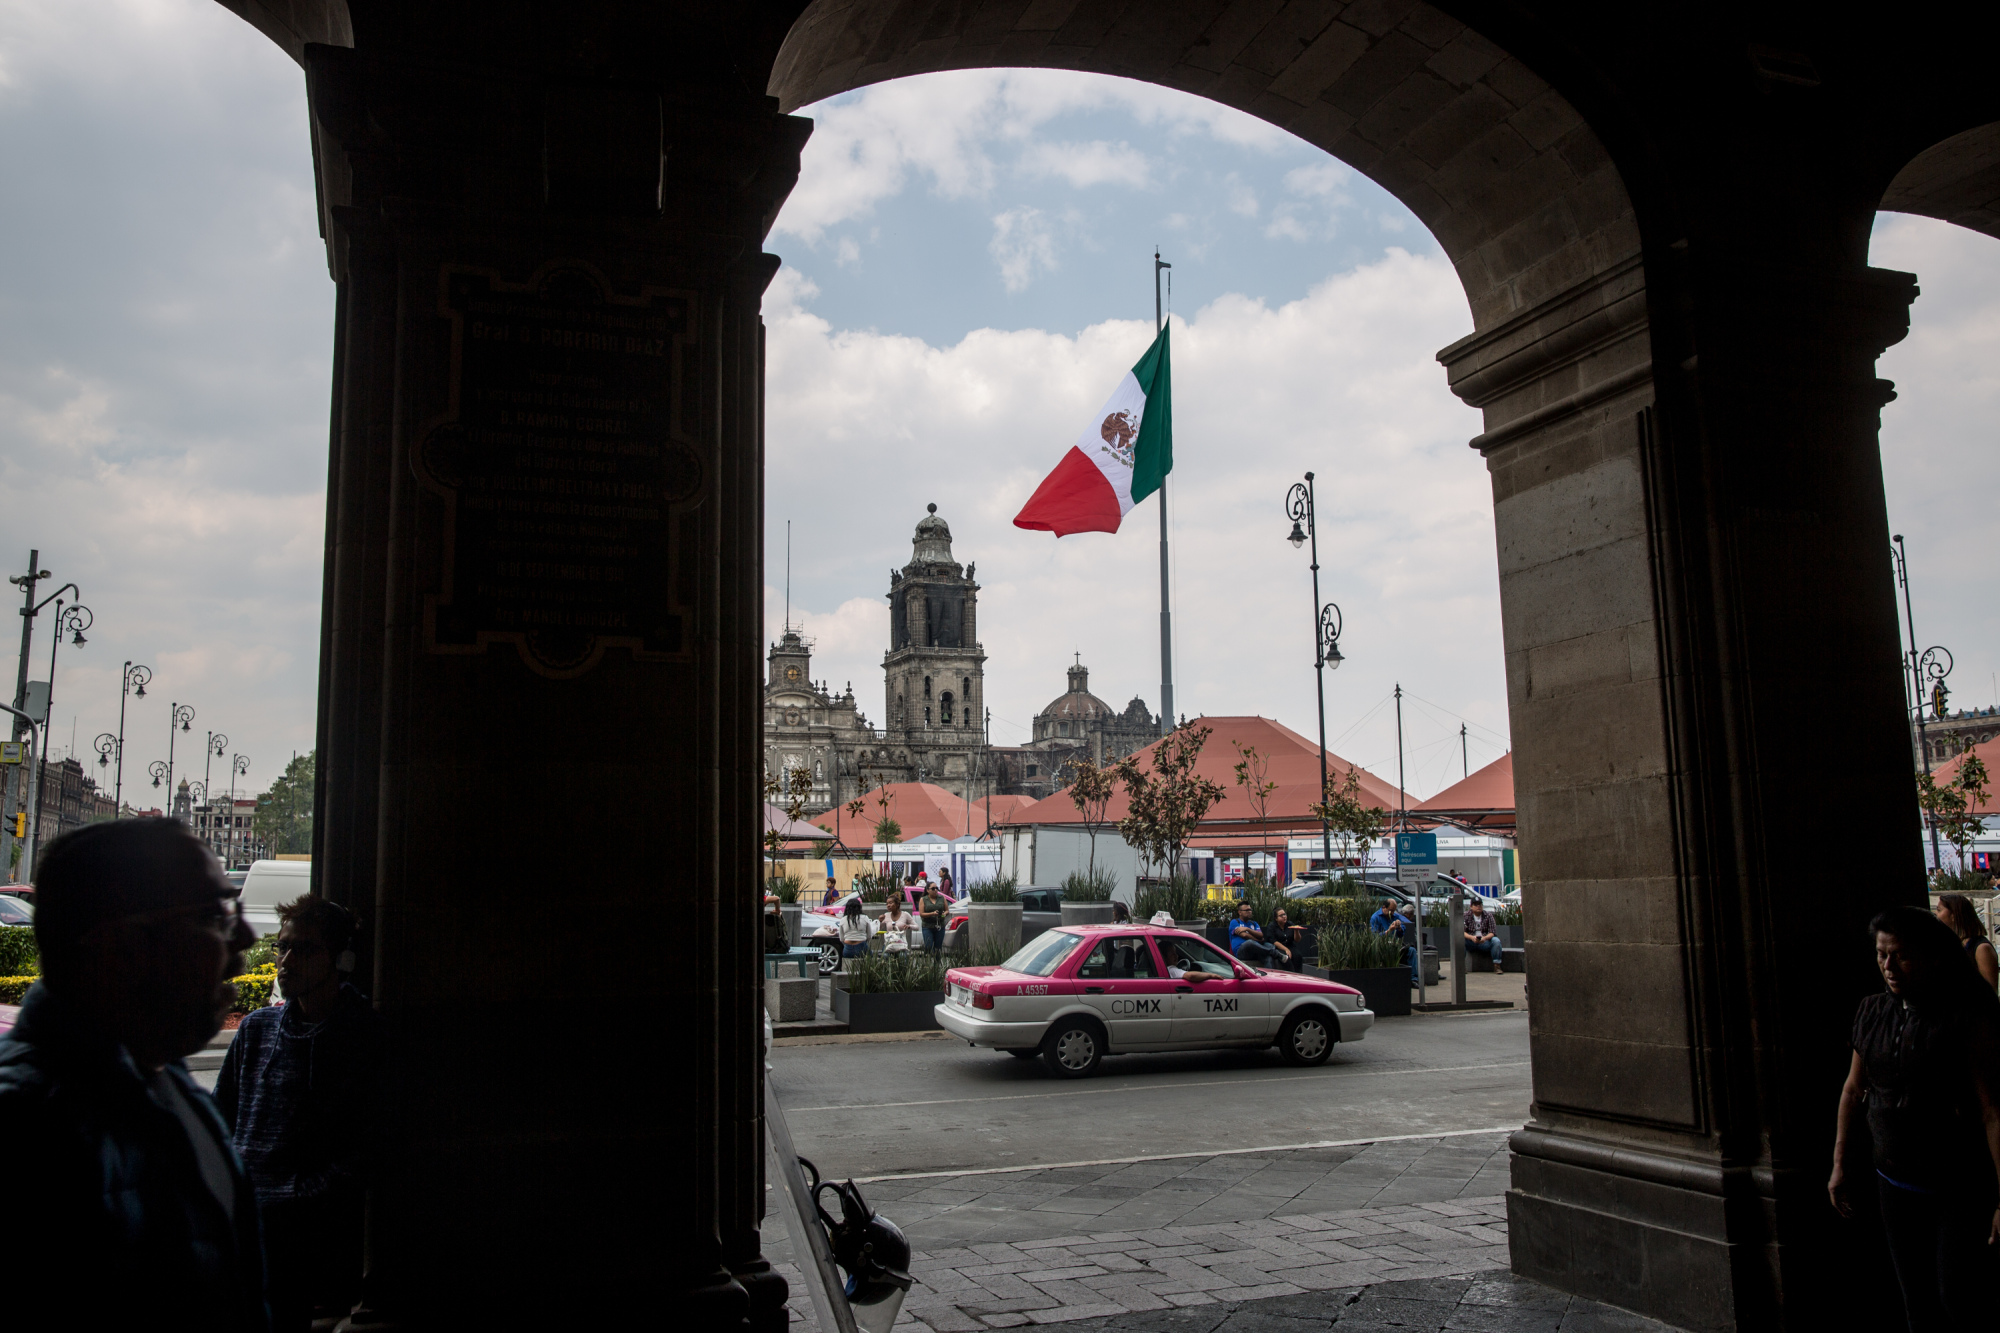 A taxi cab passes in front of the Mexican flag flying at the Plaza de la Constitucion (Zocalo) in Mexico City, Mexico, on Friday, April 13, 2018.